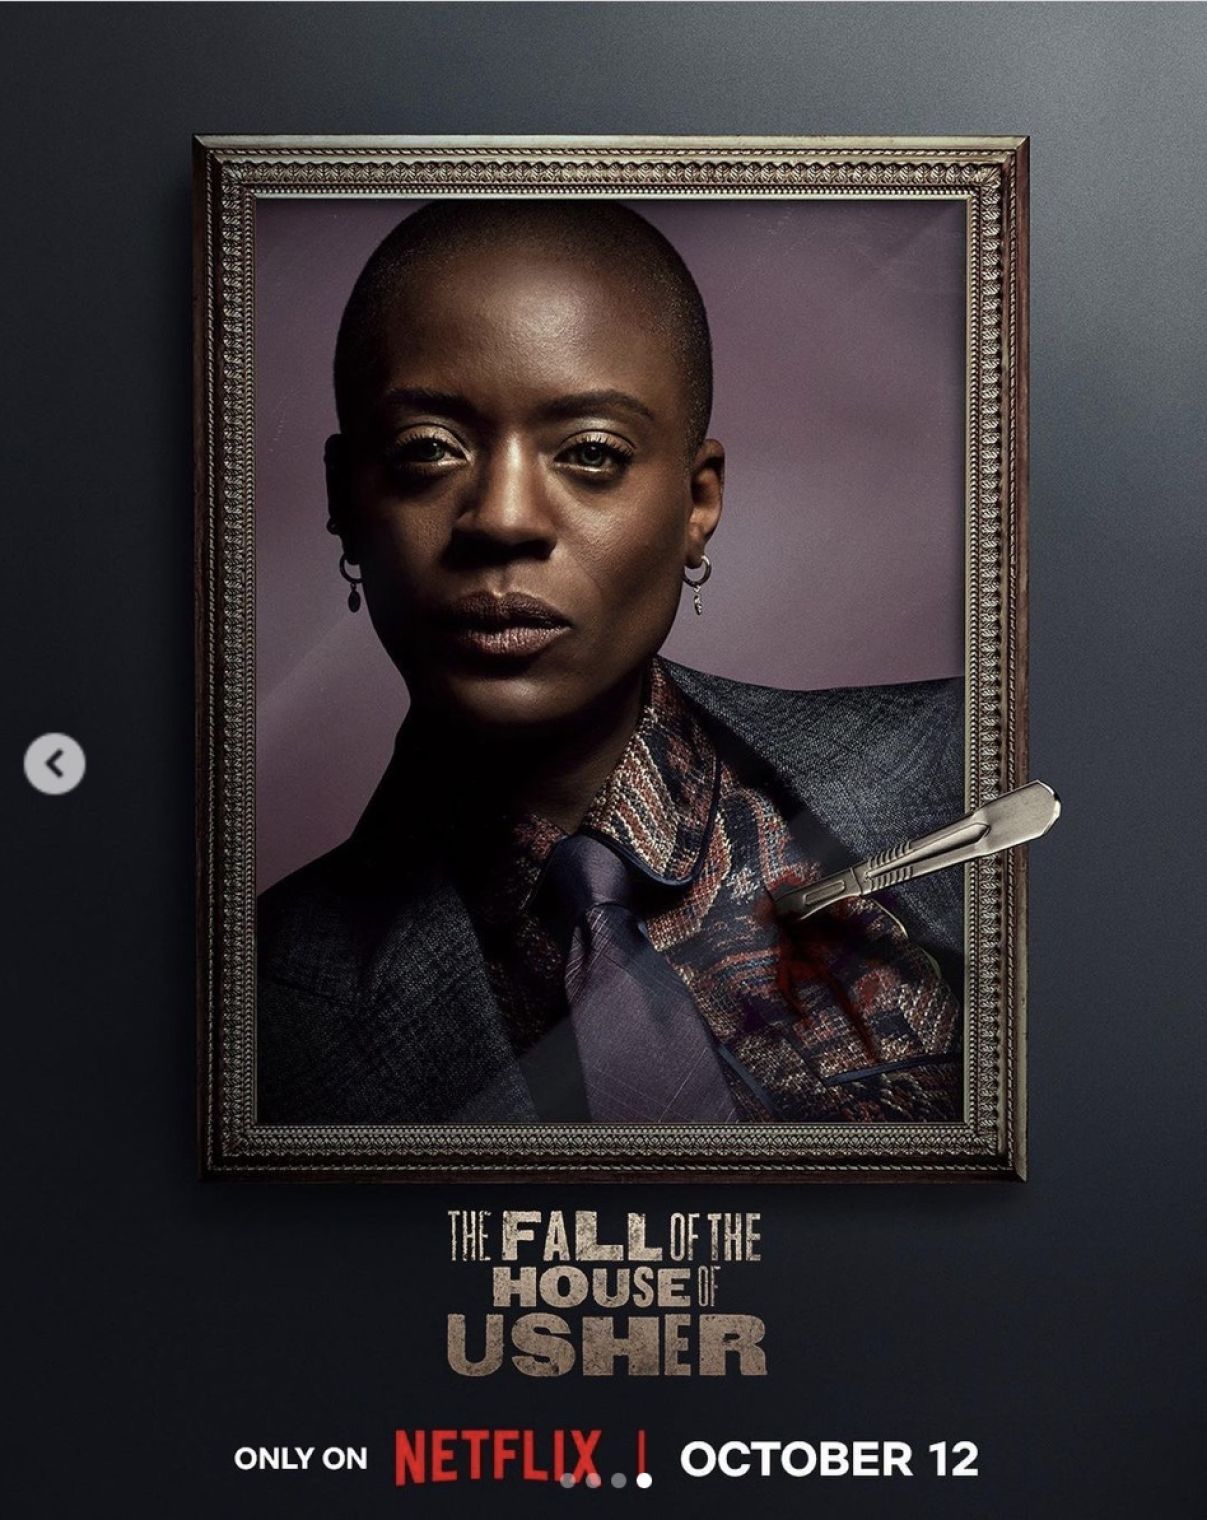 T’Nia Miller stars as Victorine LaFourcade in the gruesome 8-part horror series ’The Fall of the House of Usher’ which is out on Netflix today